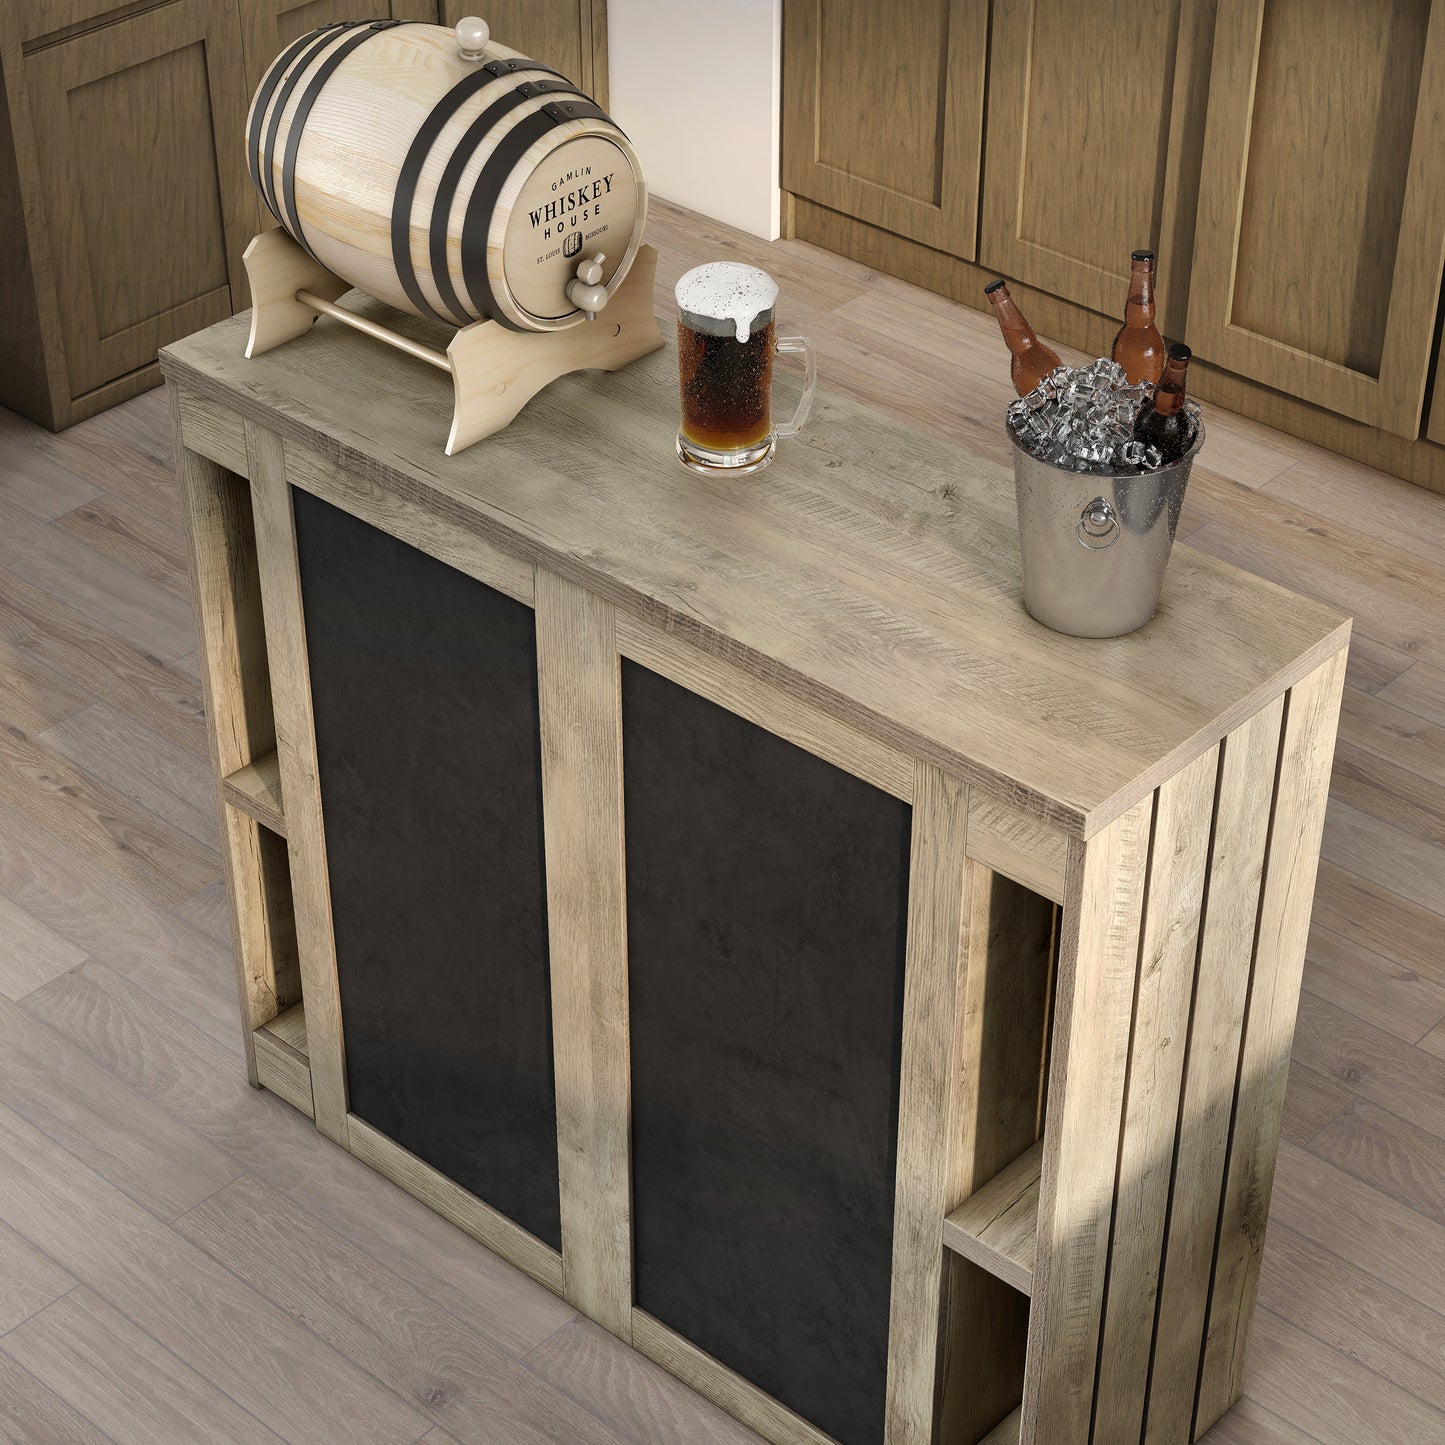 Left angled bird's eye view of a rustic weathered oak nine-shelf home bar with chalkboard doors in a living space with accessories